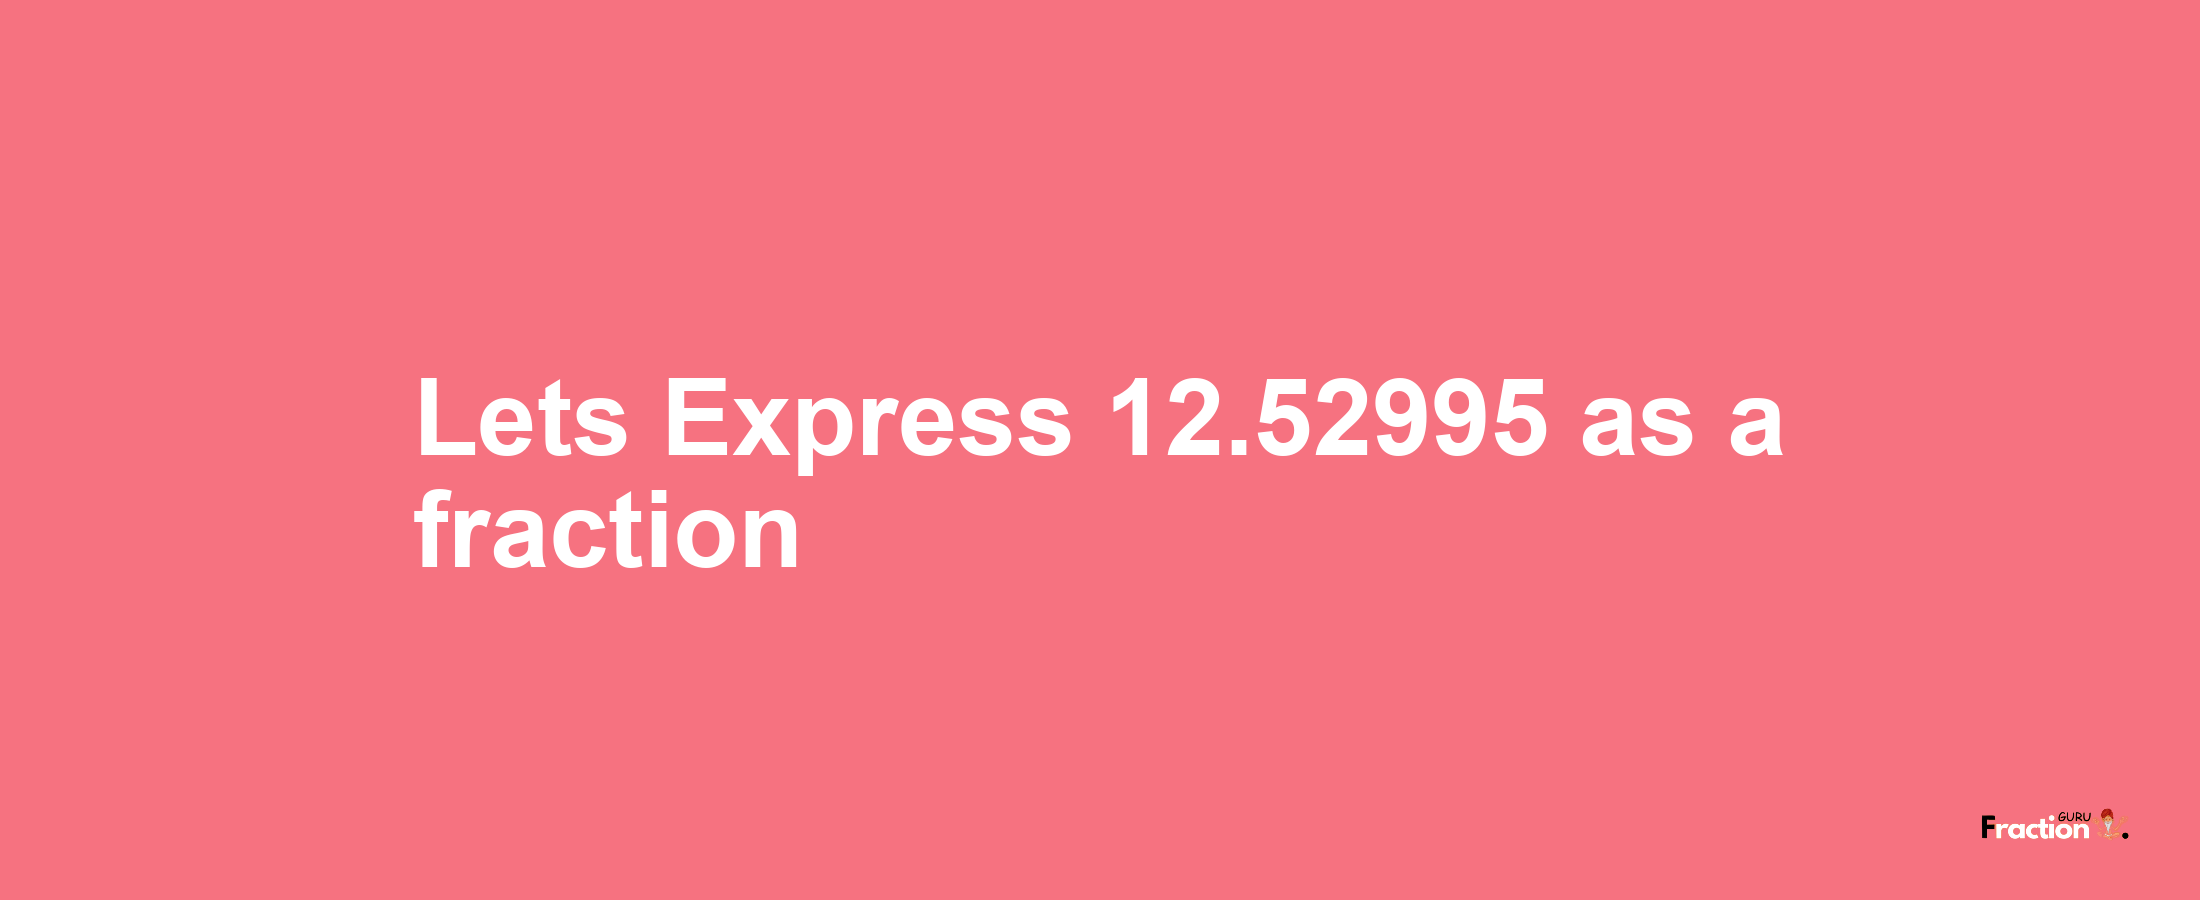 Lets Express 12.52995 as afraction